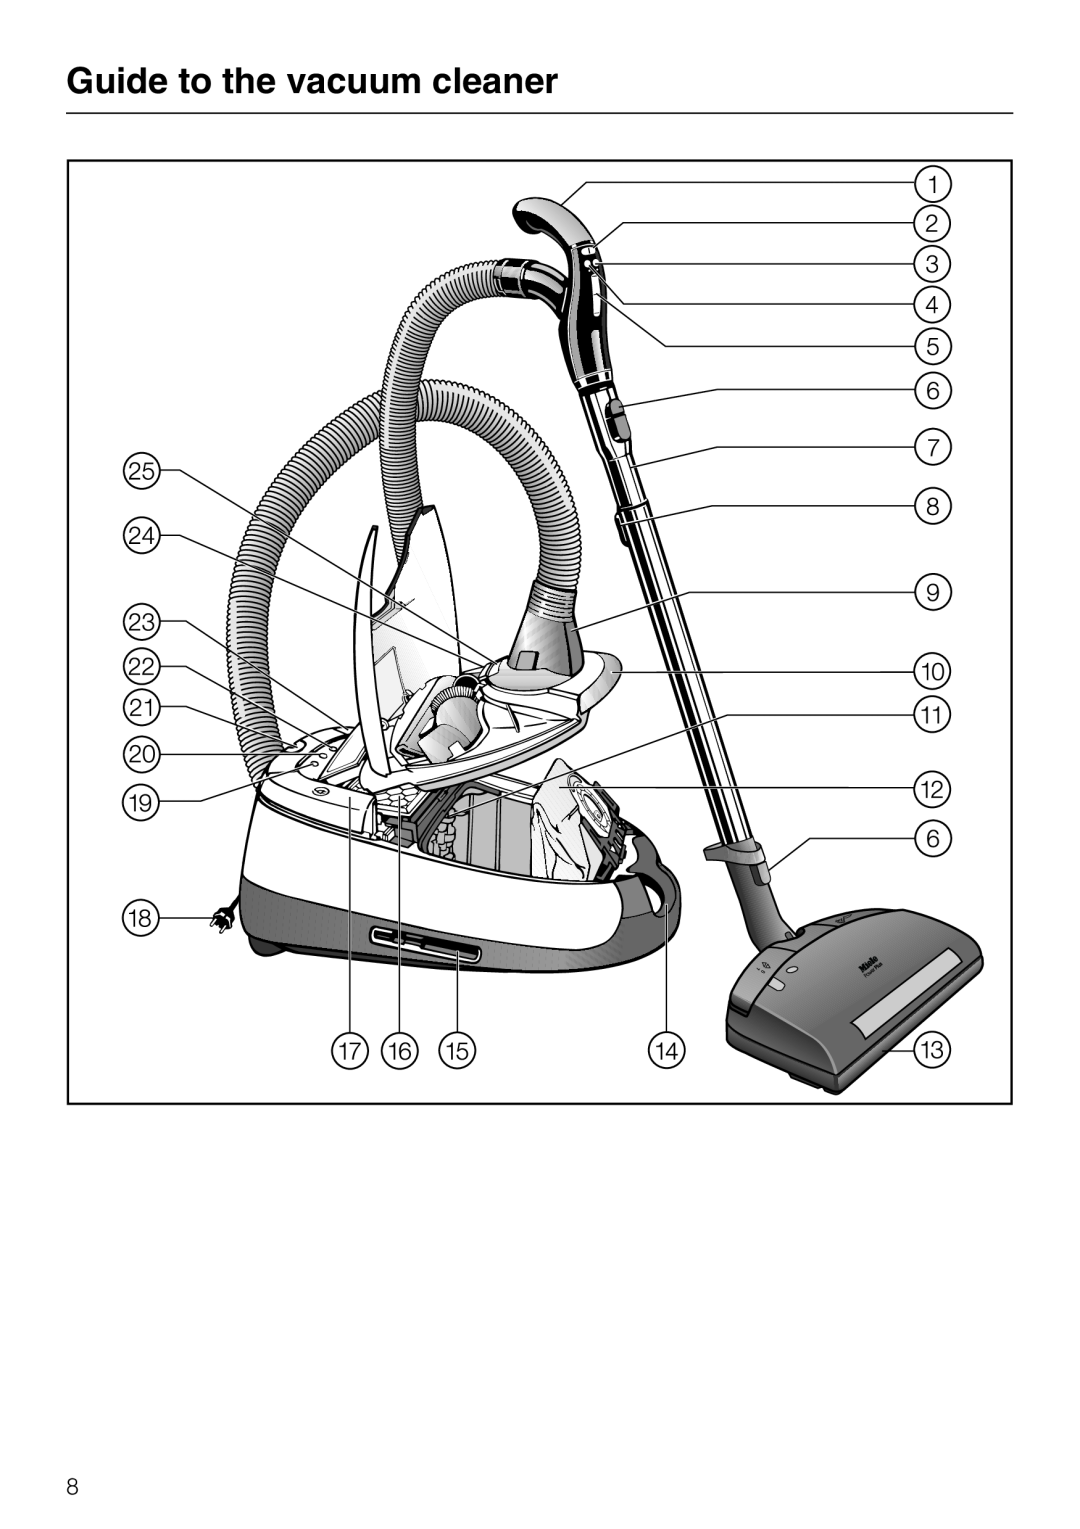 Miele S5981 operating instructions Guide to the vacuum cleaner 